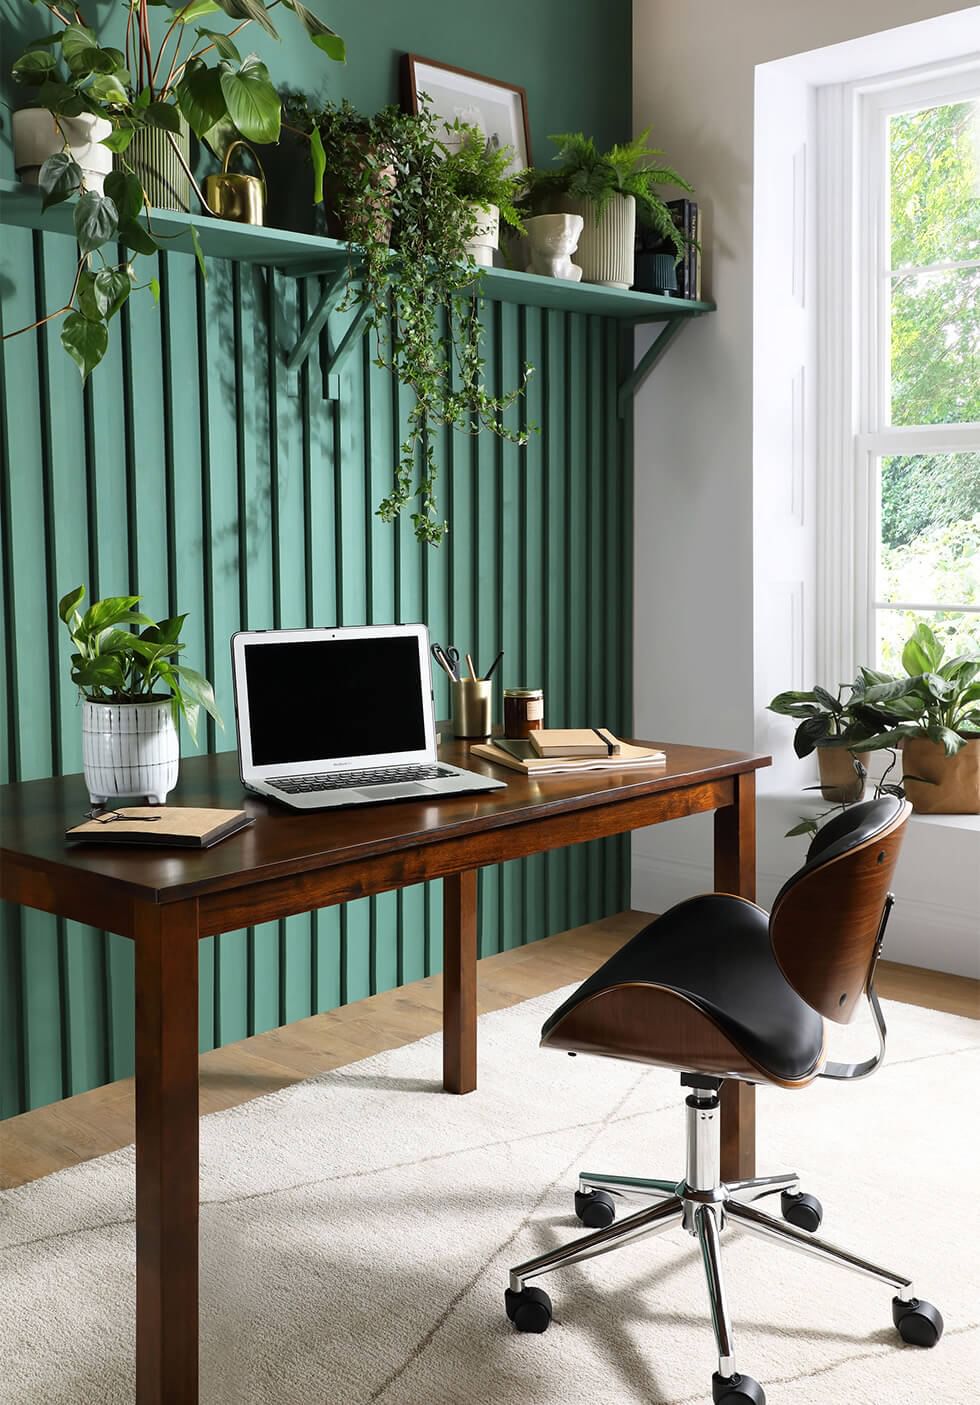 Spare room used as an indoor garden featuring a wooden desk